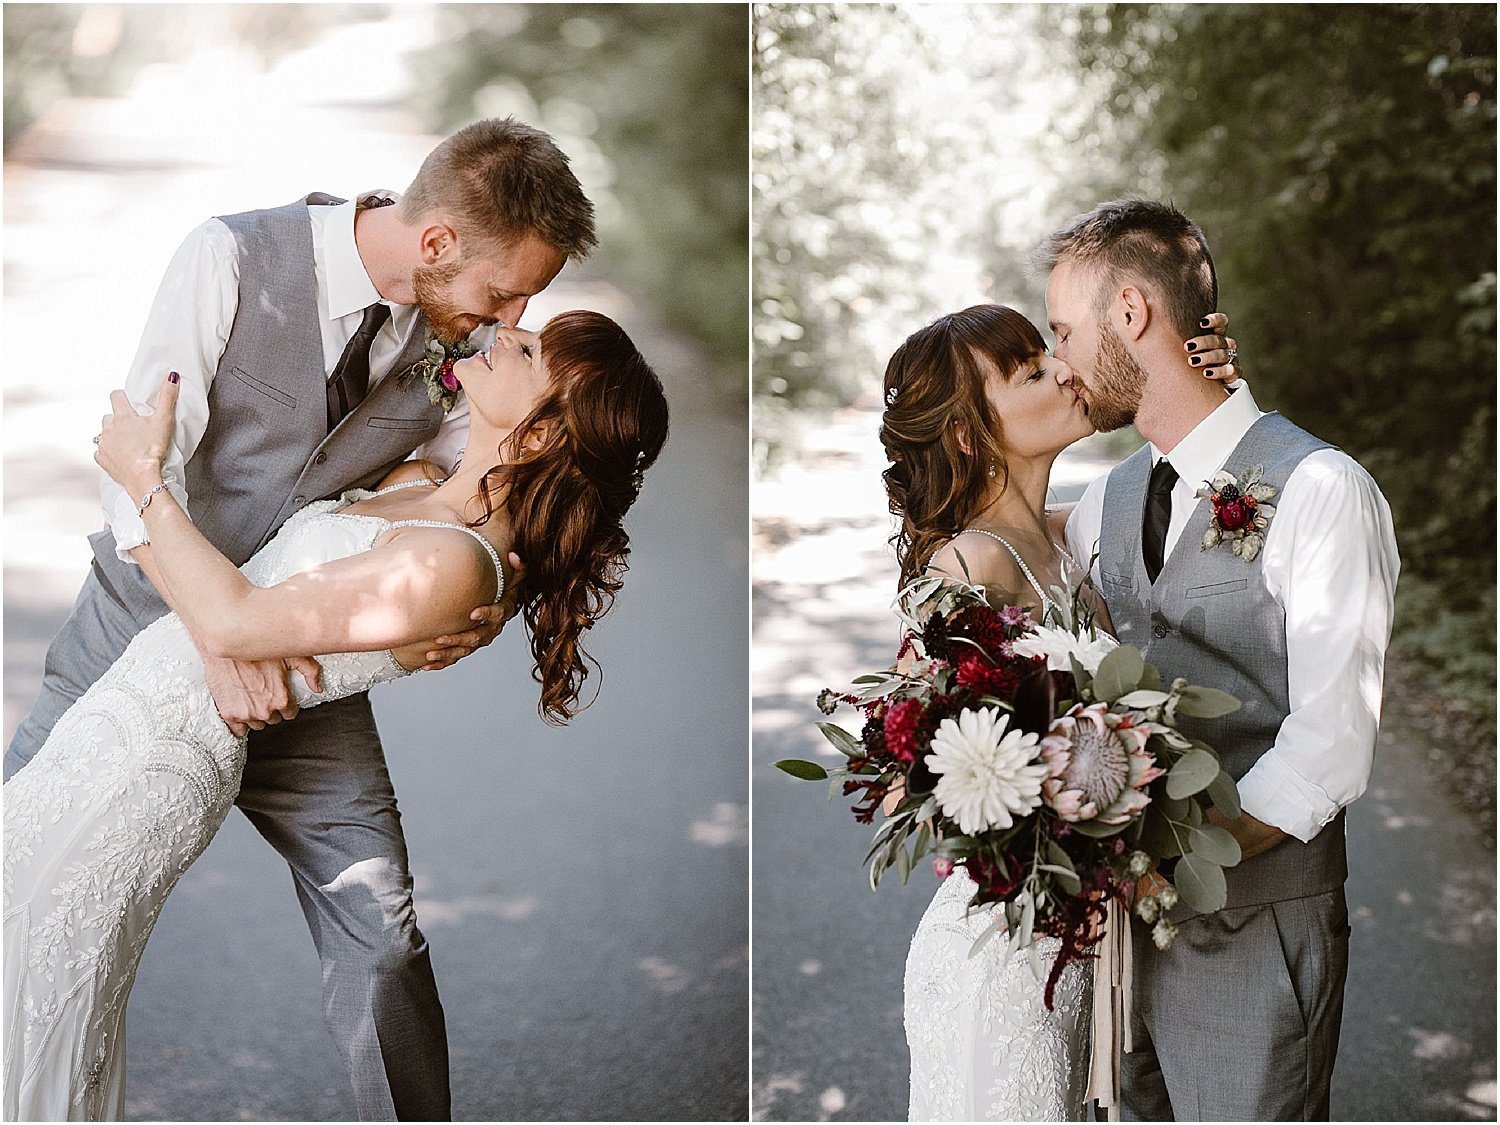 Couple Photos at The Barn at Chestnut Springs